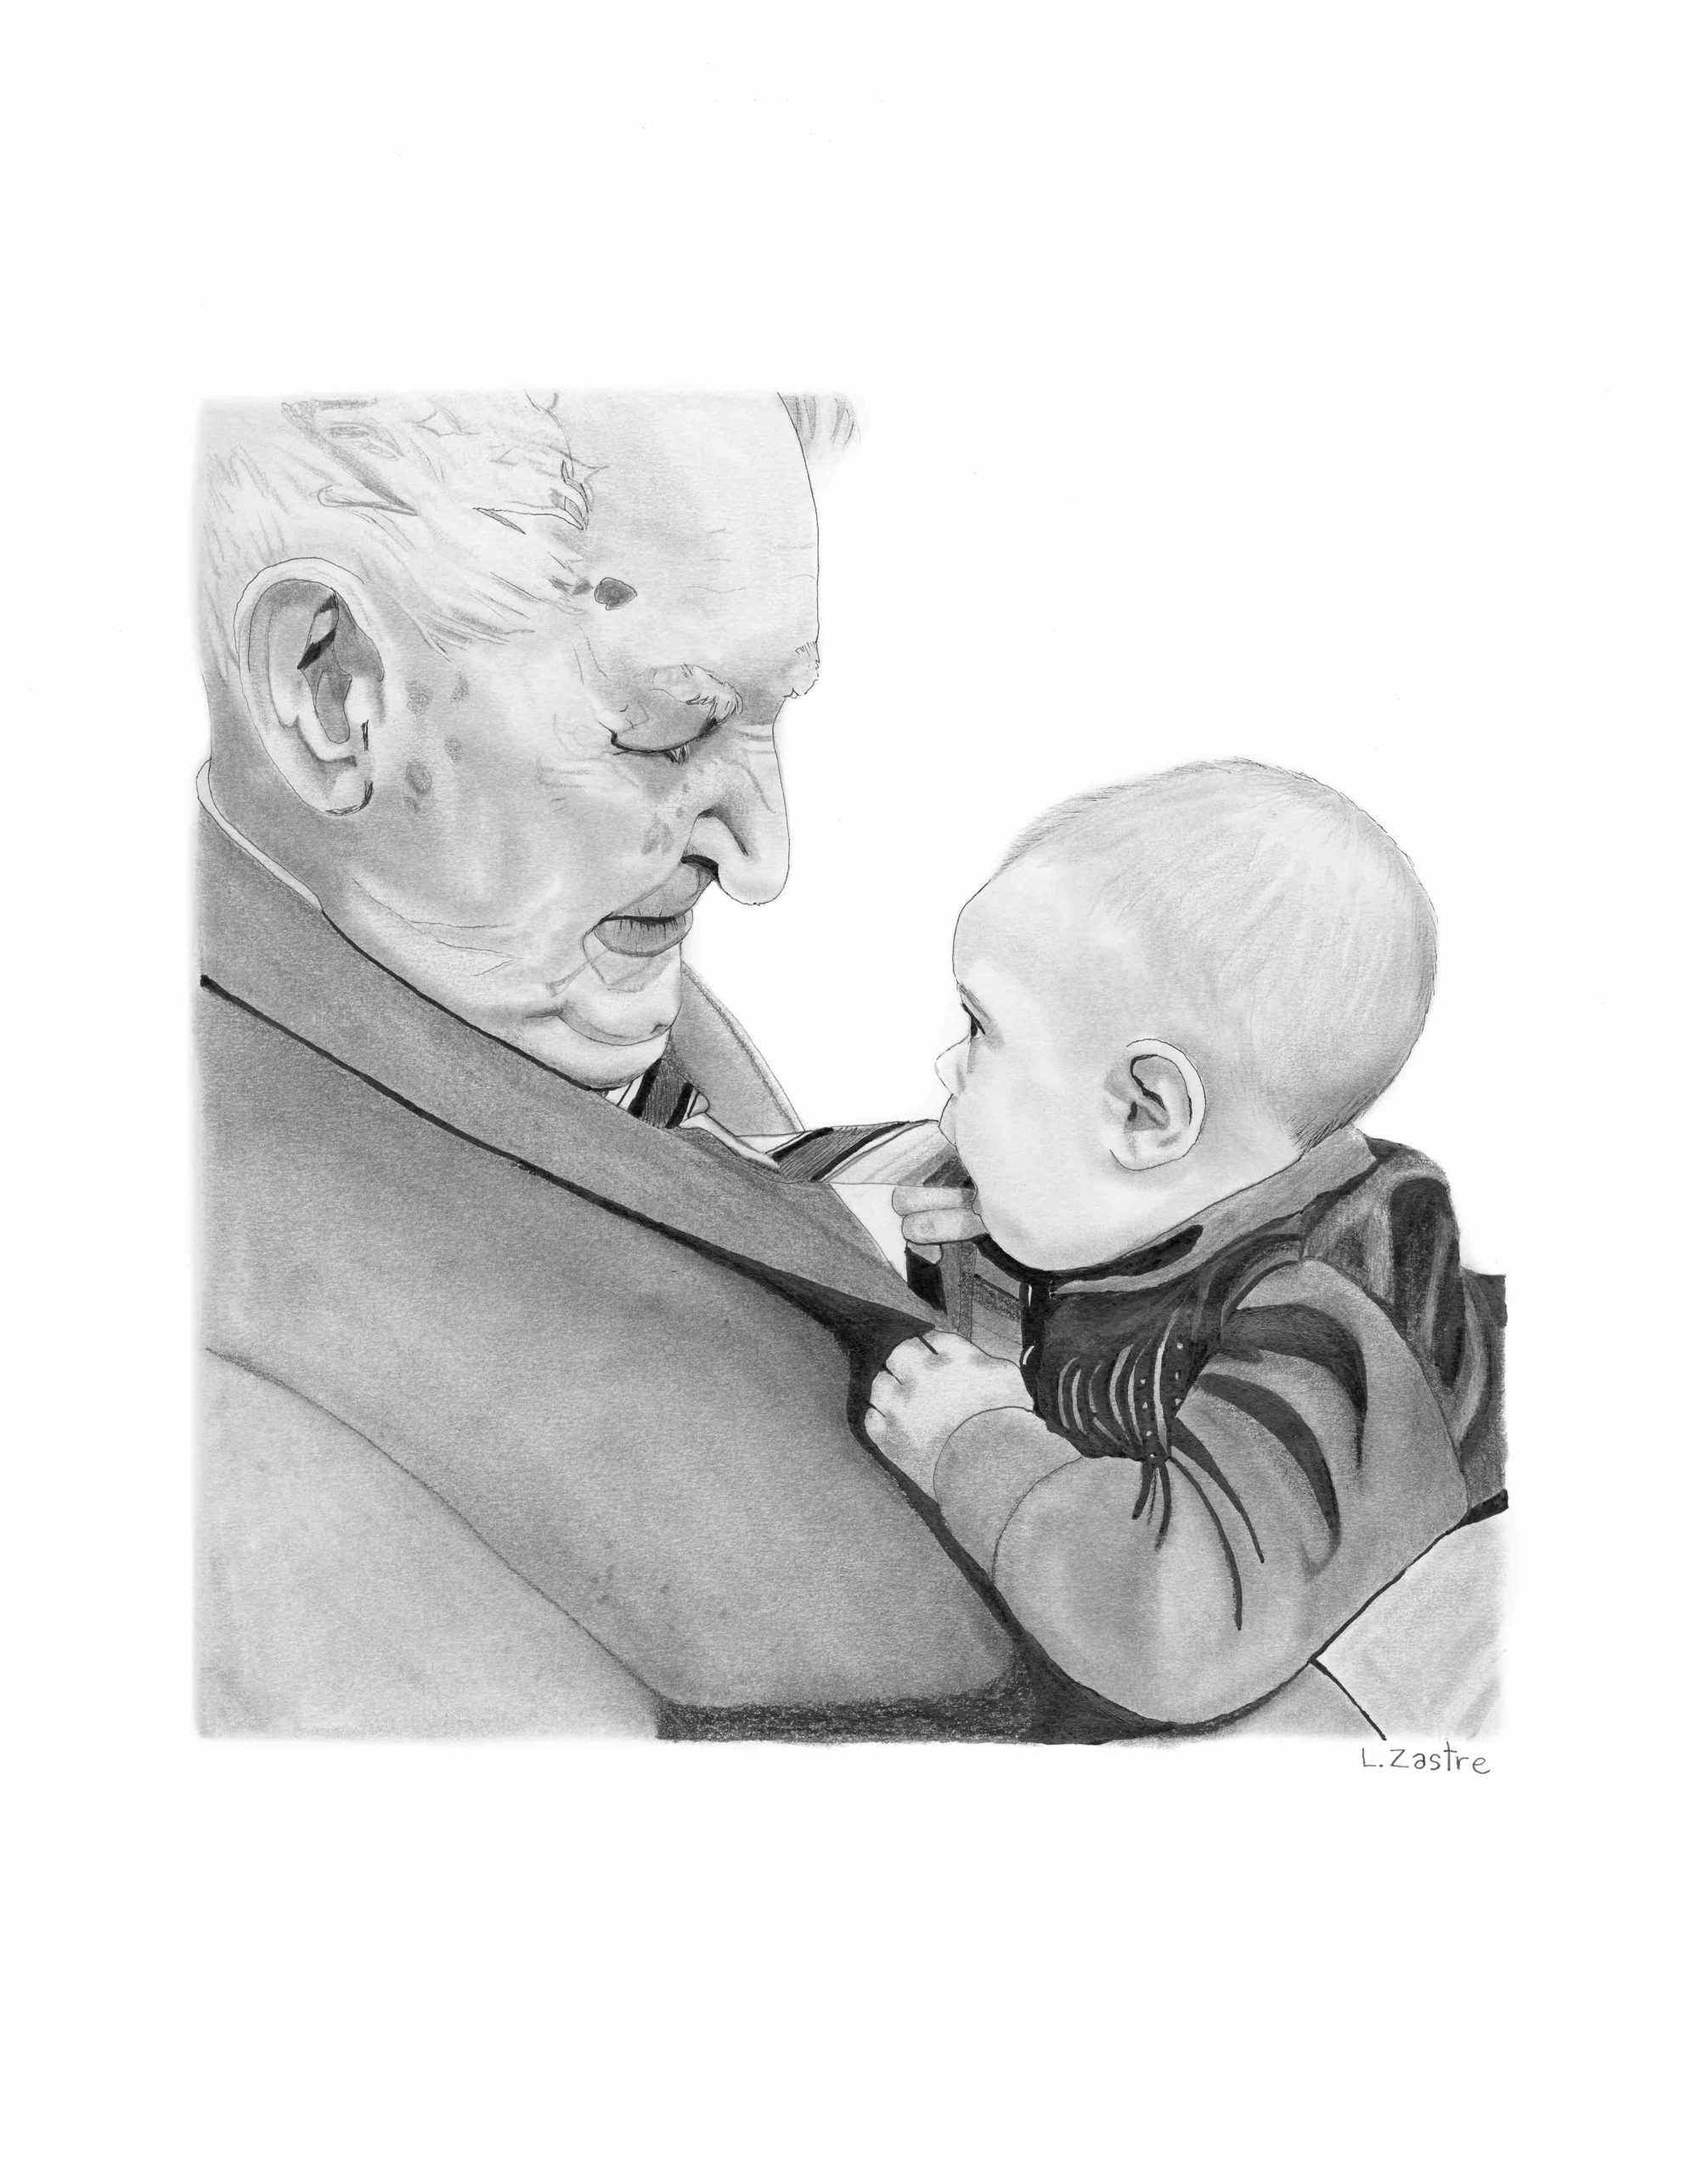 This is a drawing of an elderly man holding a baby. The man has white hair and is wearing a formal suit. He holds the baby in front of him and gazes down, watching the baby gum on his necktie.